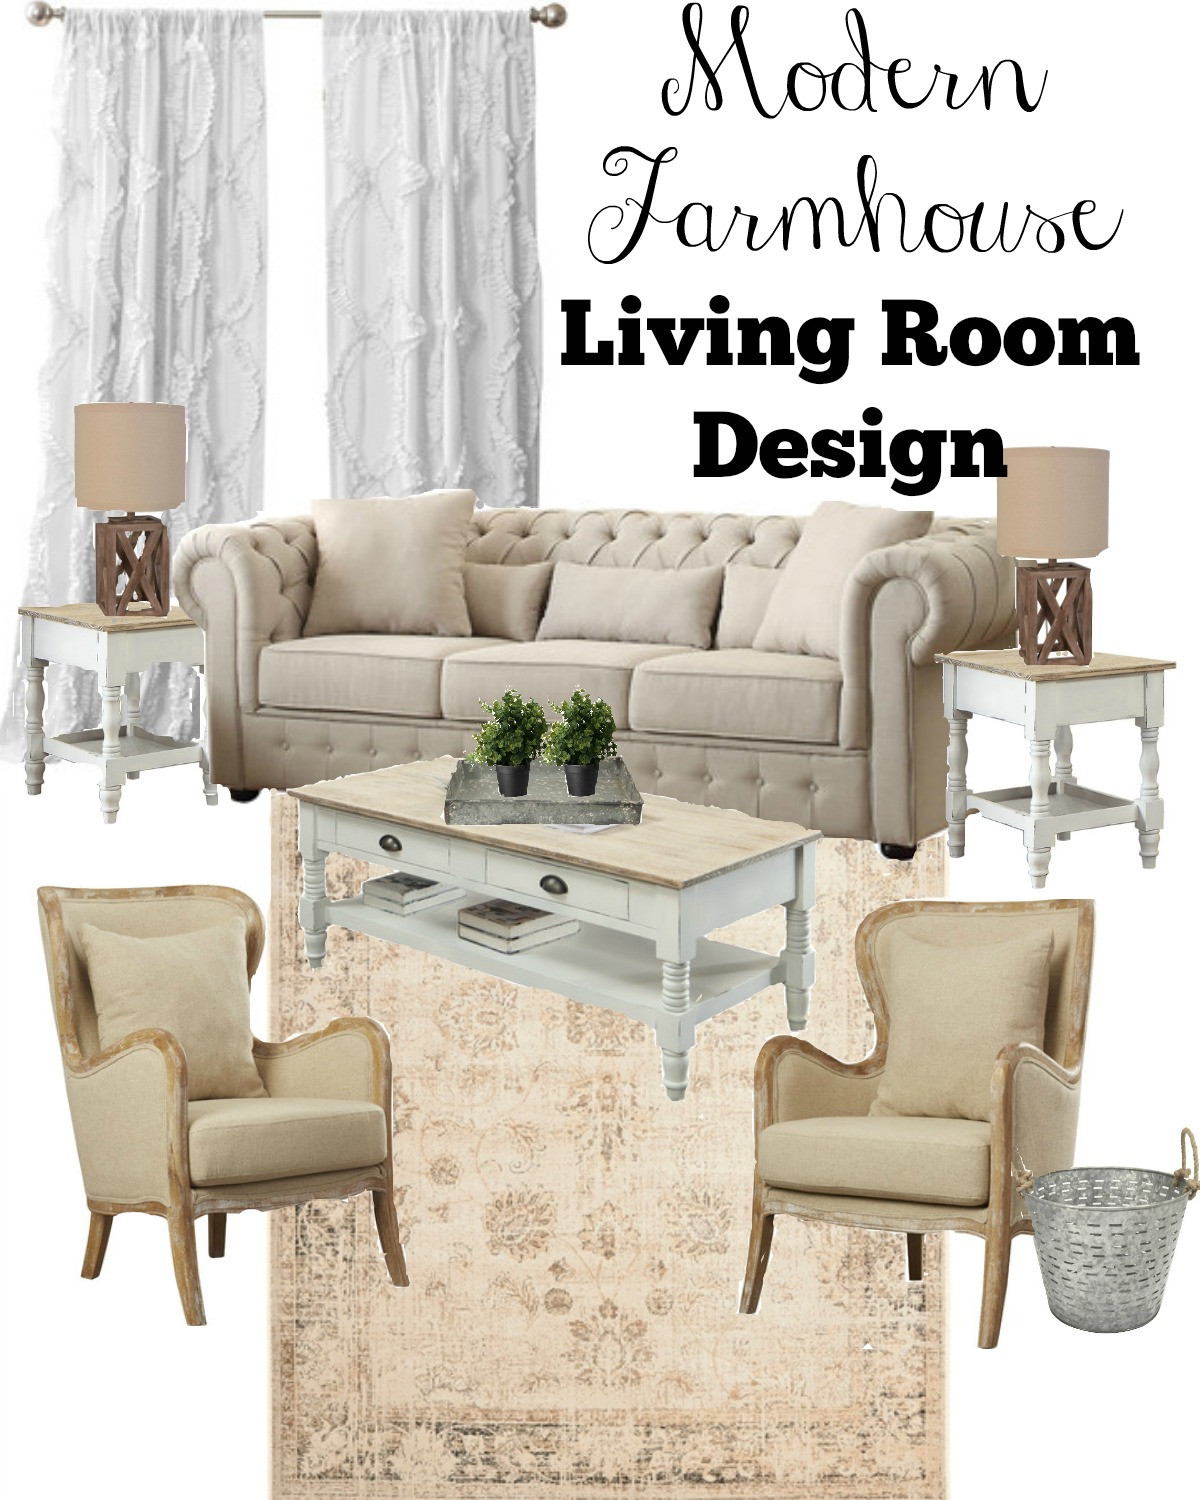 Farmhouse Style Living Room
 3 Key Tips for a Farmhouse Style Living Room